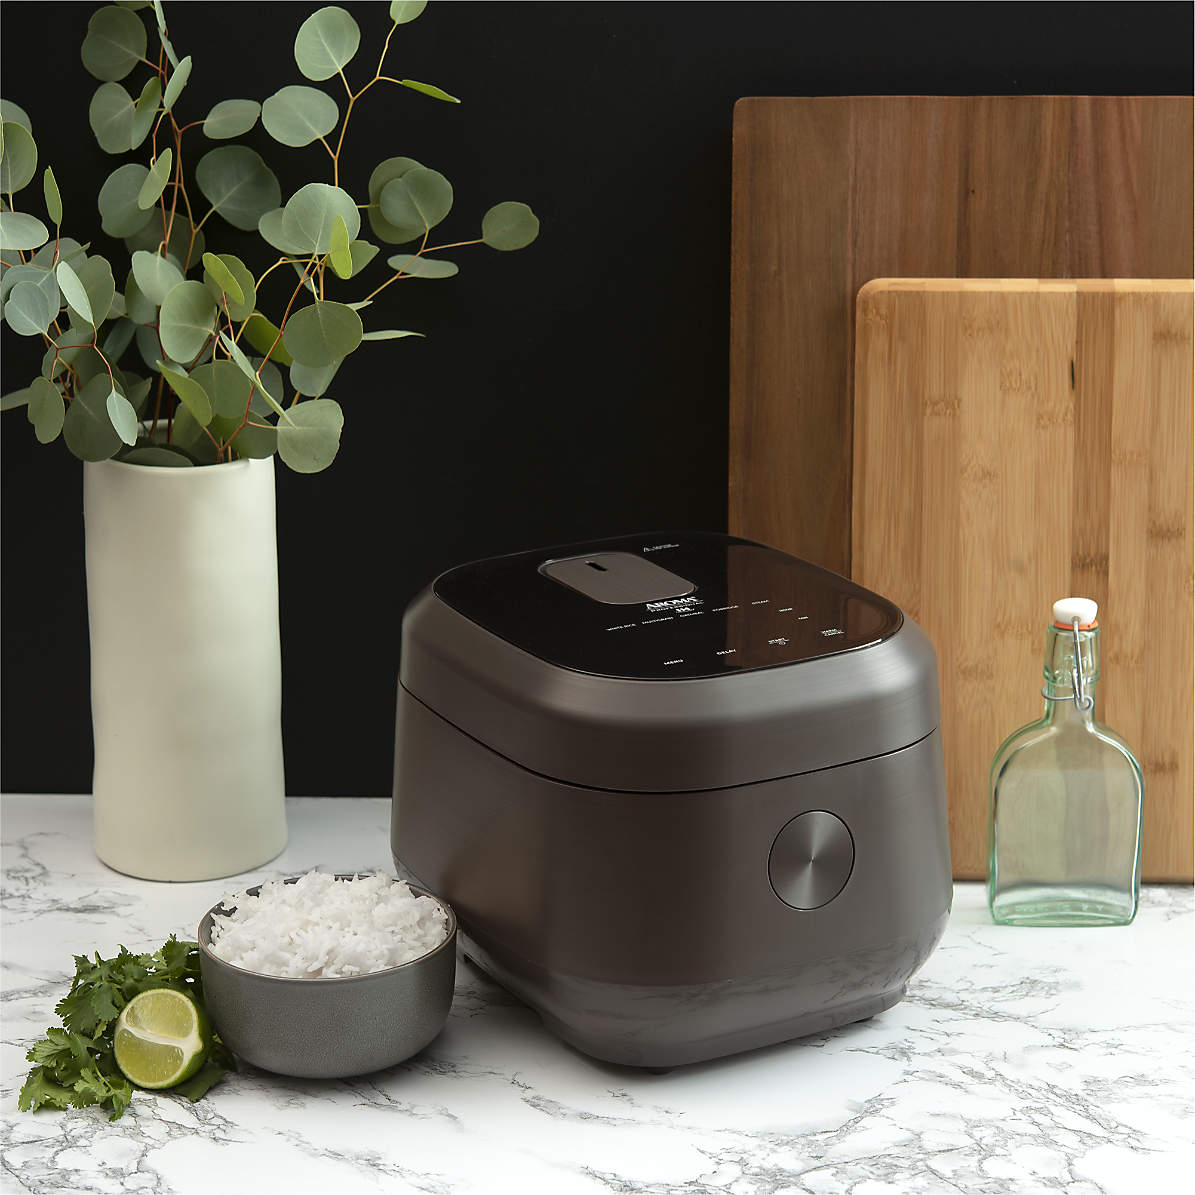 AROMA Professional 12-Cup 360 Induction Rice Cooker & Multicooker + Reviews, Crate & Barrel